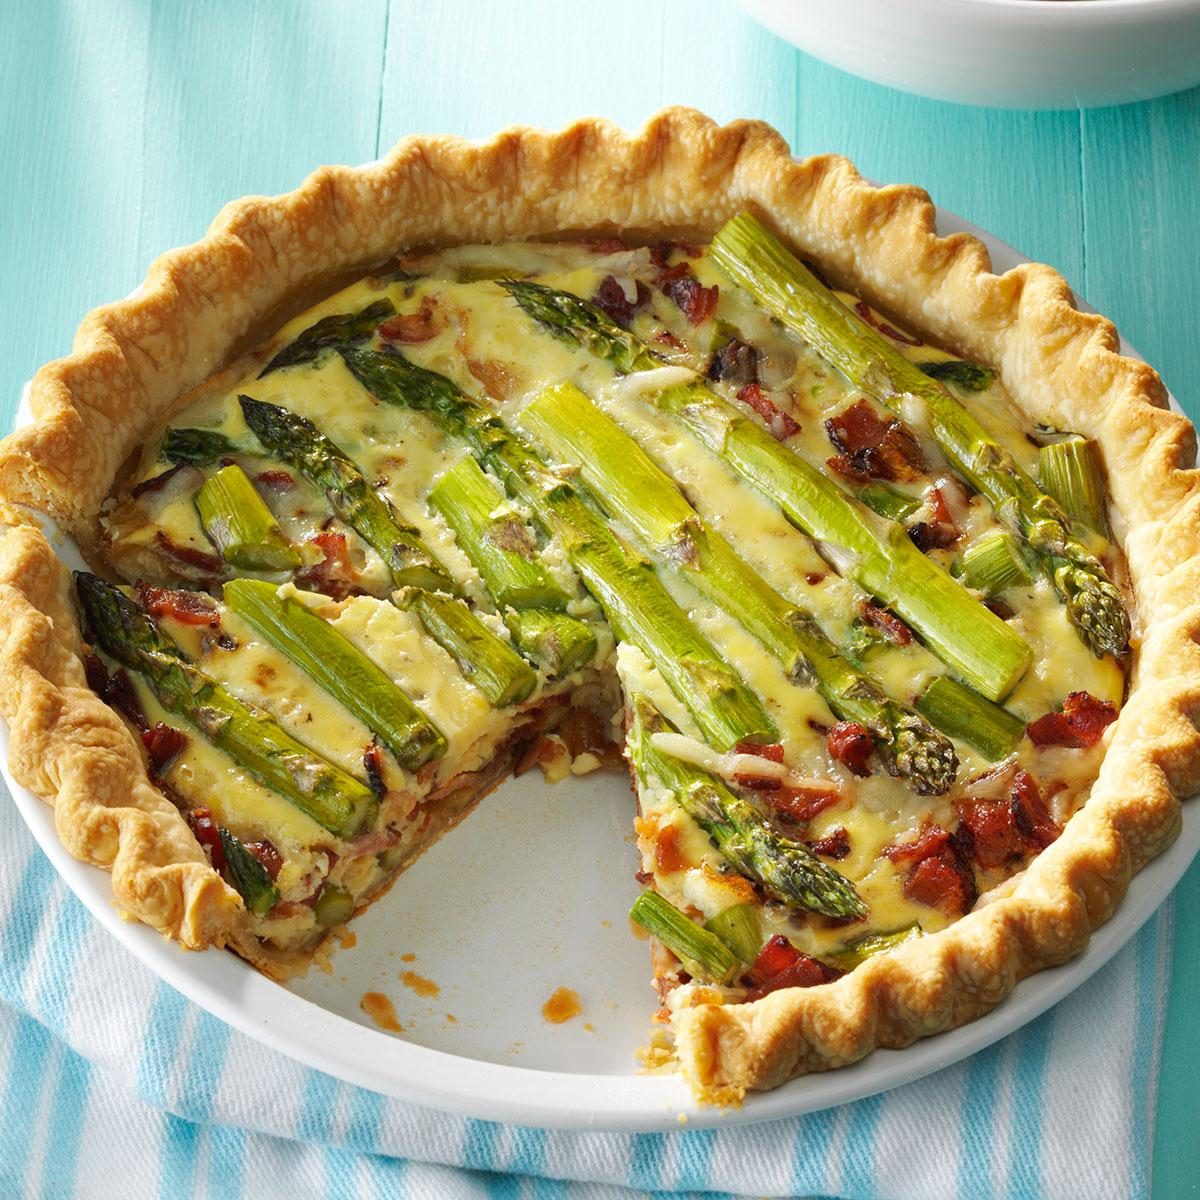 Inspired by Candice's Mini Asparagus Quiches